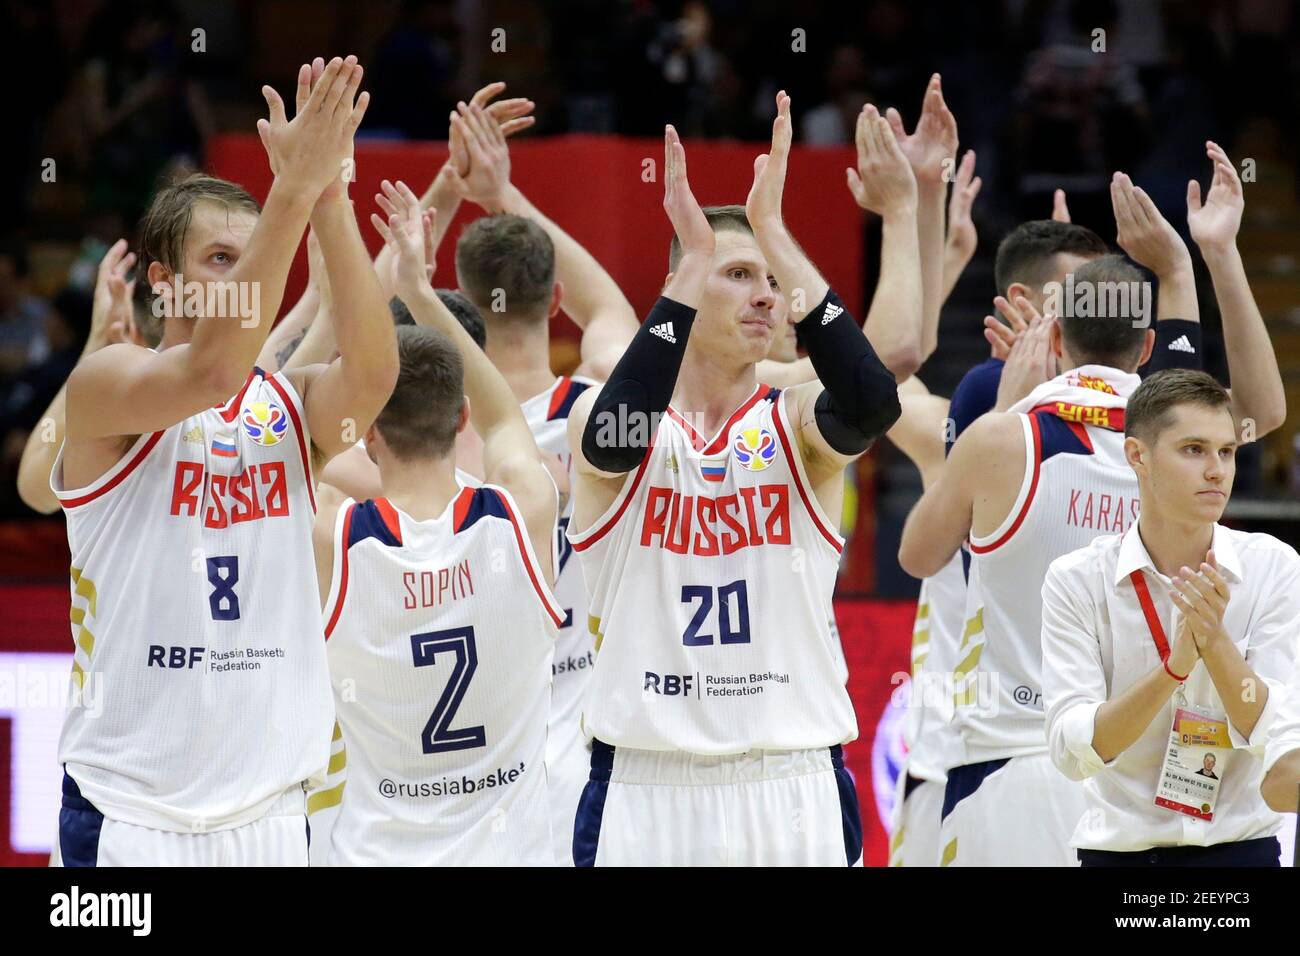 Basketball - FIBA World Cup - Russia v Nigeria - Wuhan Sports Center, Wuhan, China - August 31, 2019 Russia players applaud fans after the match REUTERS/Jason Lee Stock Photo